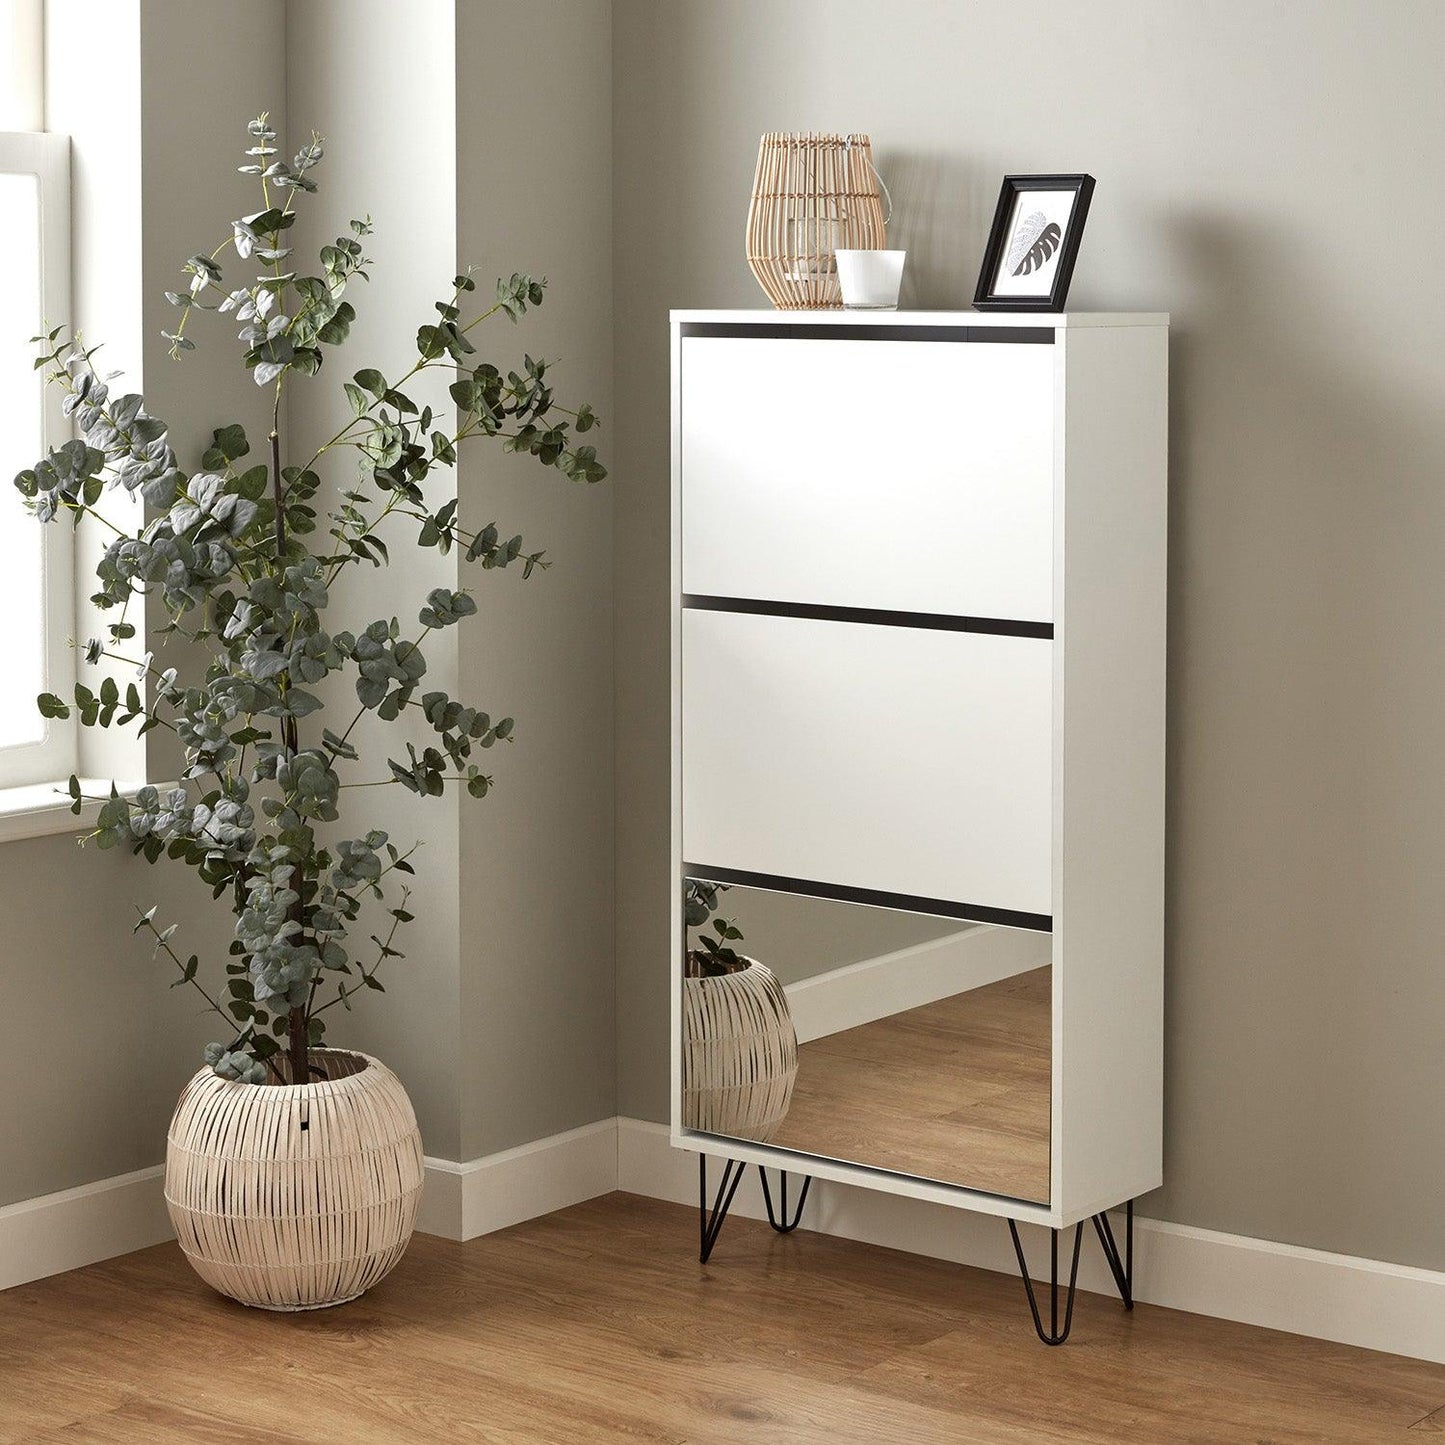 Anderson shoe cabinet - 3 door - white and white - Laura James